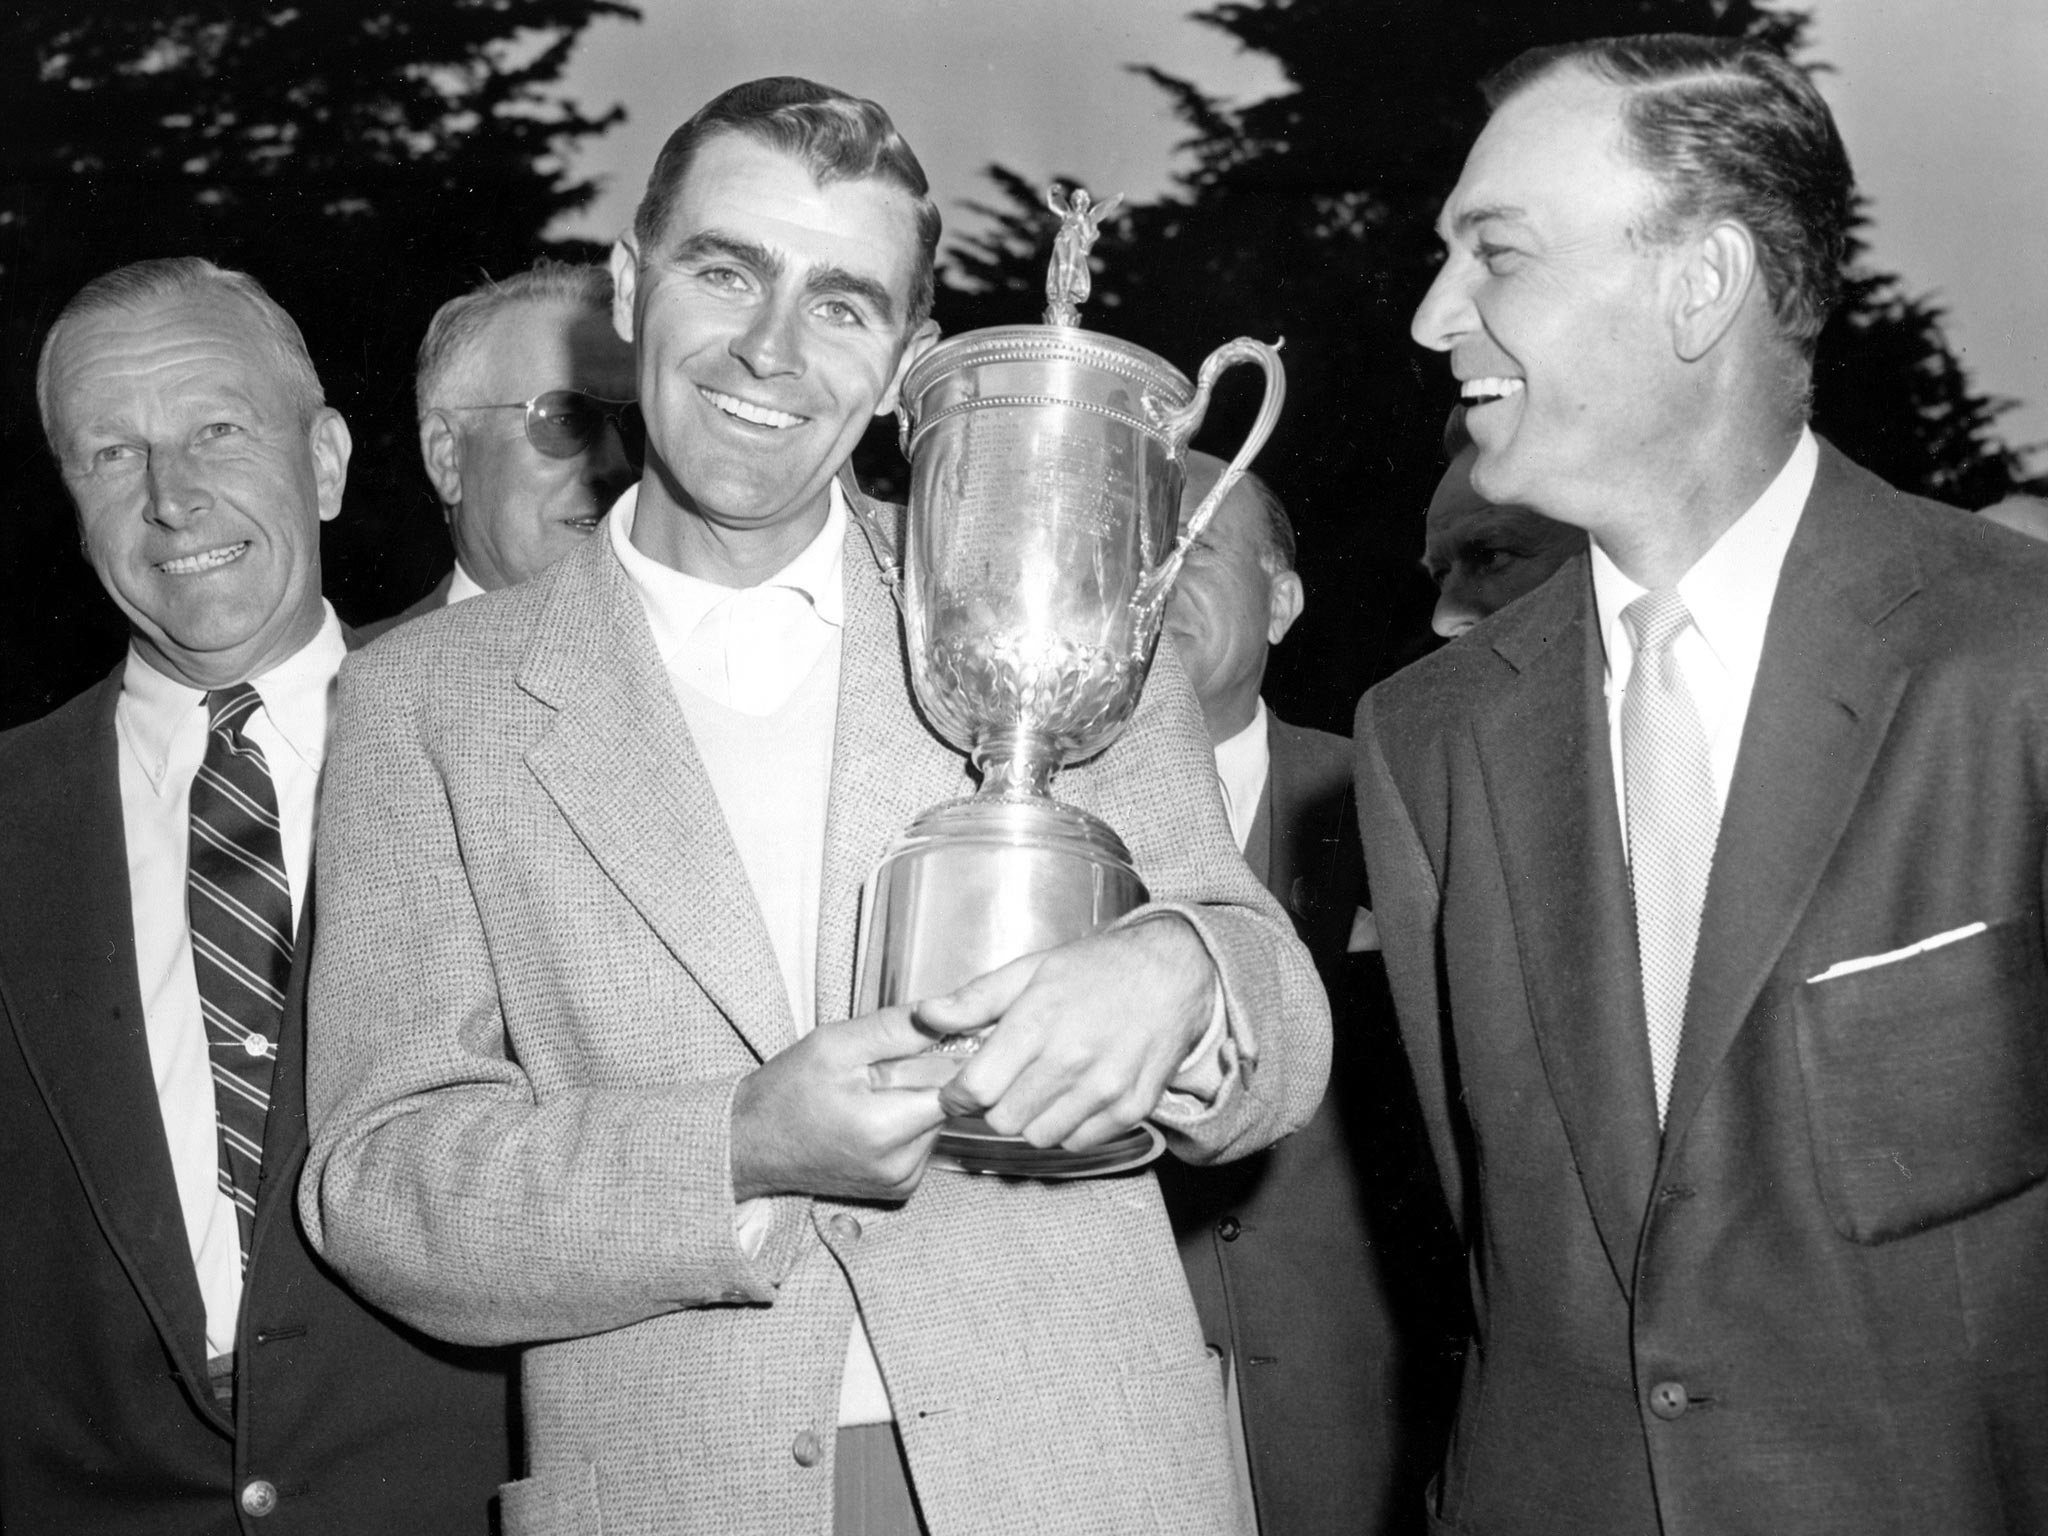 Fleck with the US Open trophy, with Ben Hogan looking on